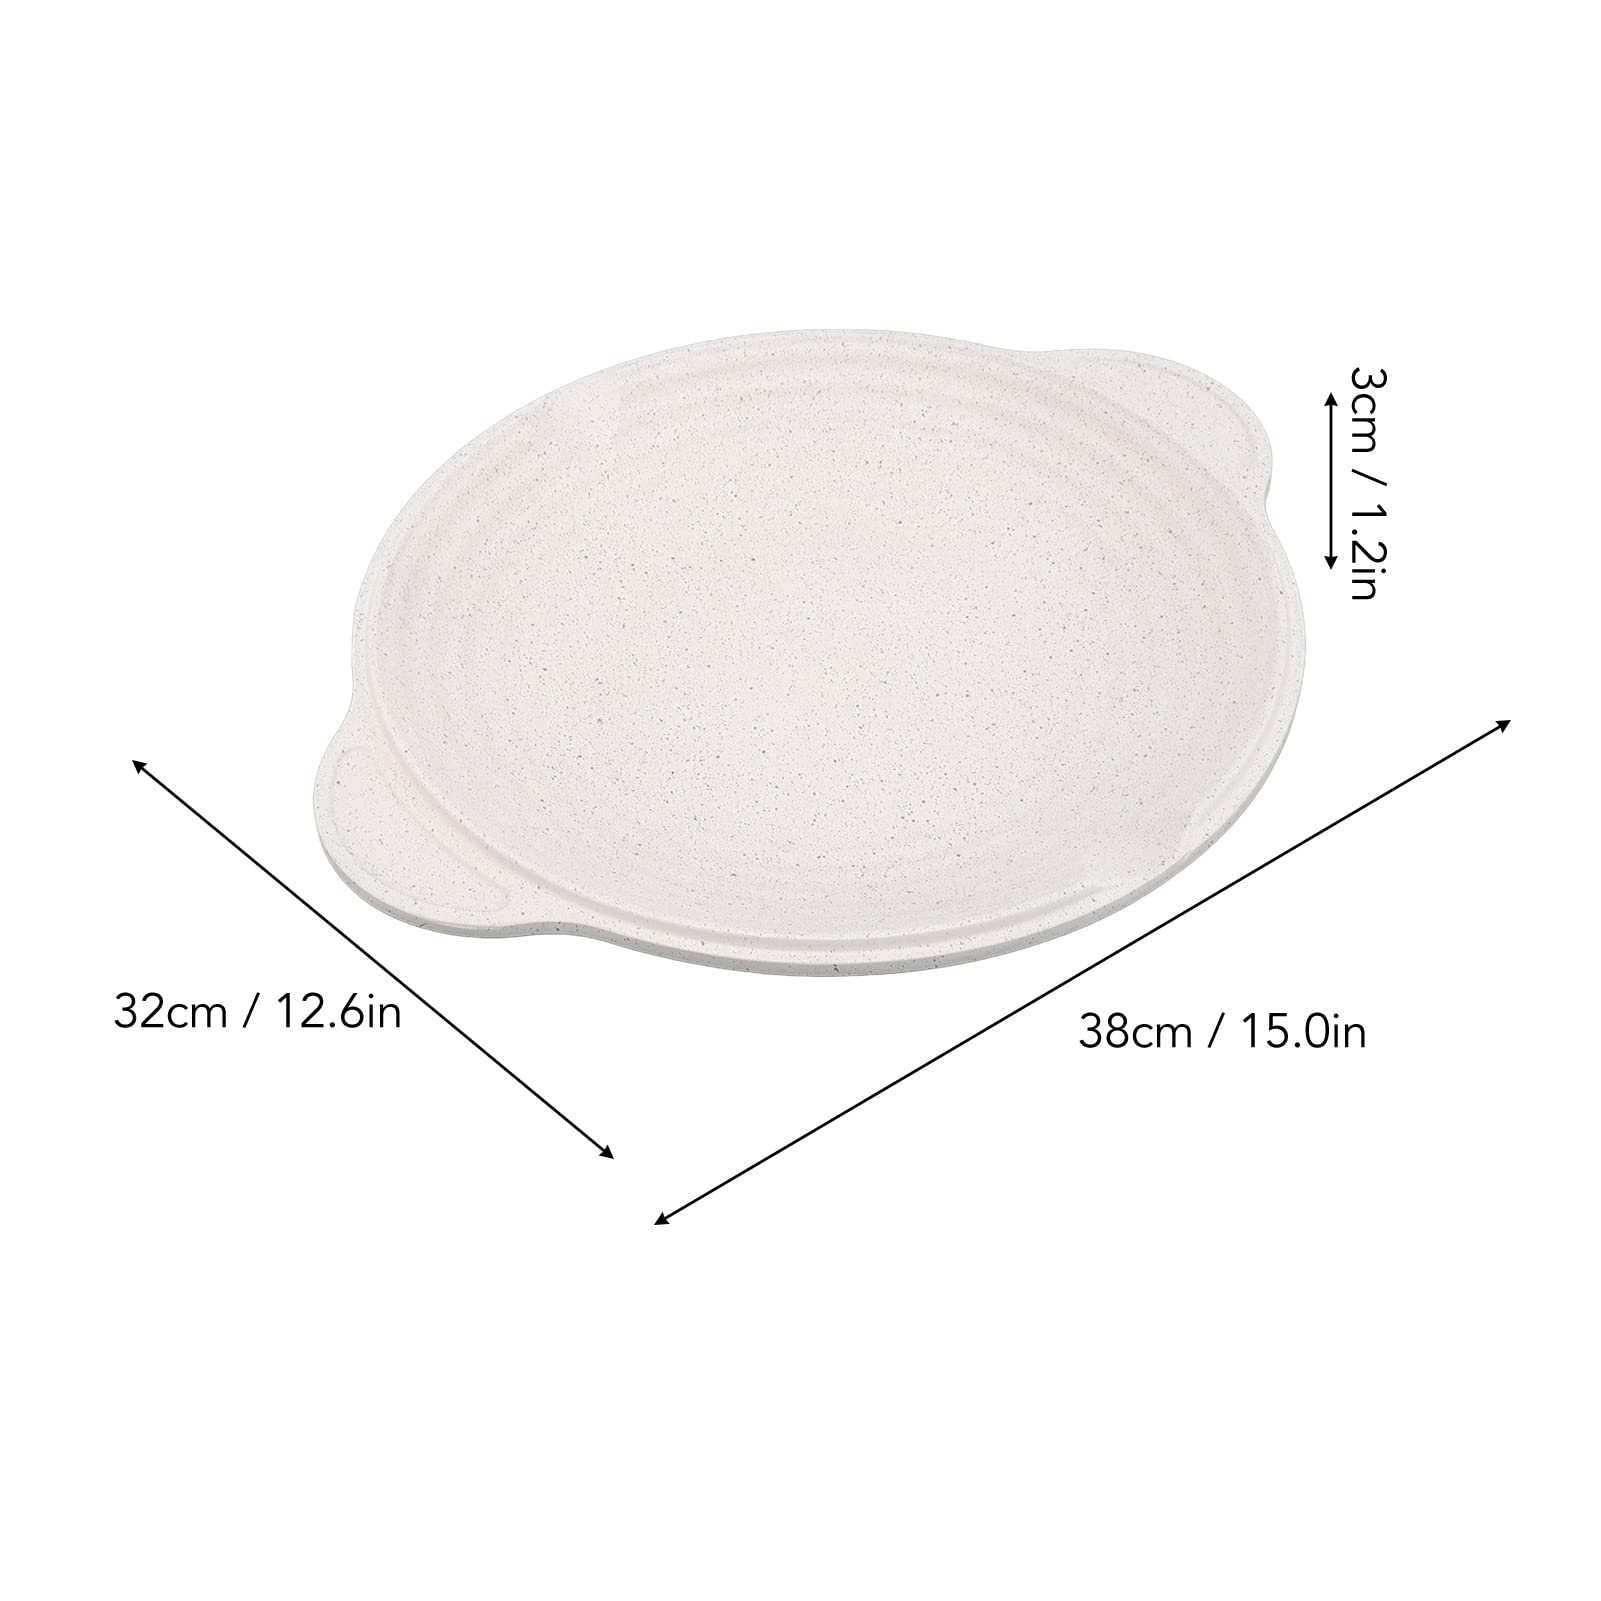 plplaaoo Korean BBQ Grill Pan,Non-stick Grill Circular BBQ Grill Pan,Griddle Pan,White 12.6 In Grill Plate for Induction Cooker,Kitchen Gadgets, for Home, Camping and Outdoor Griddle